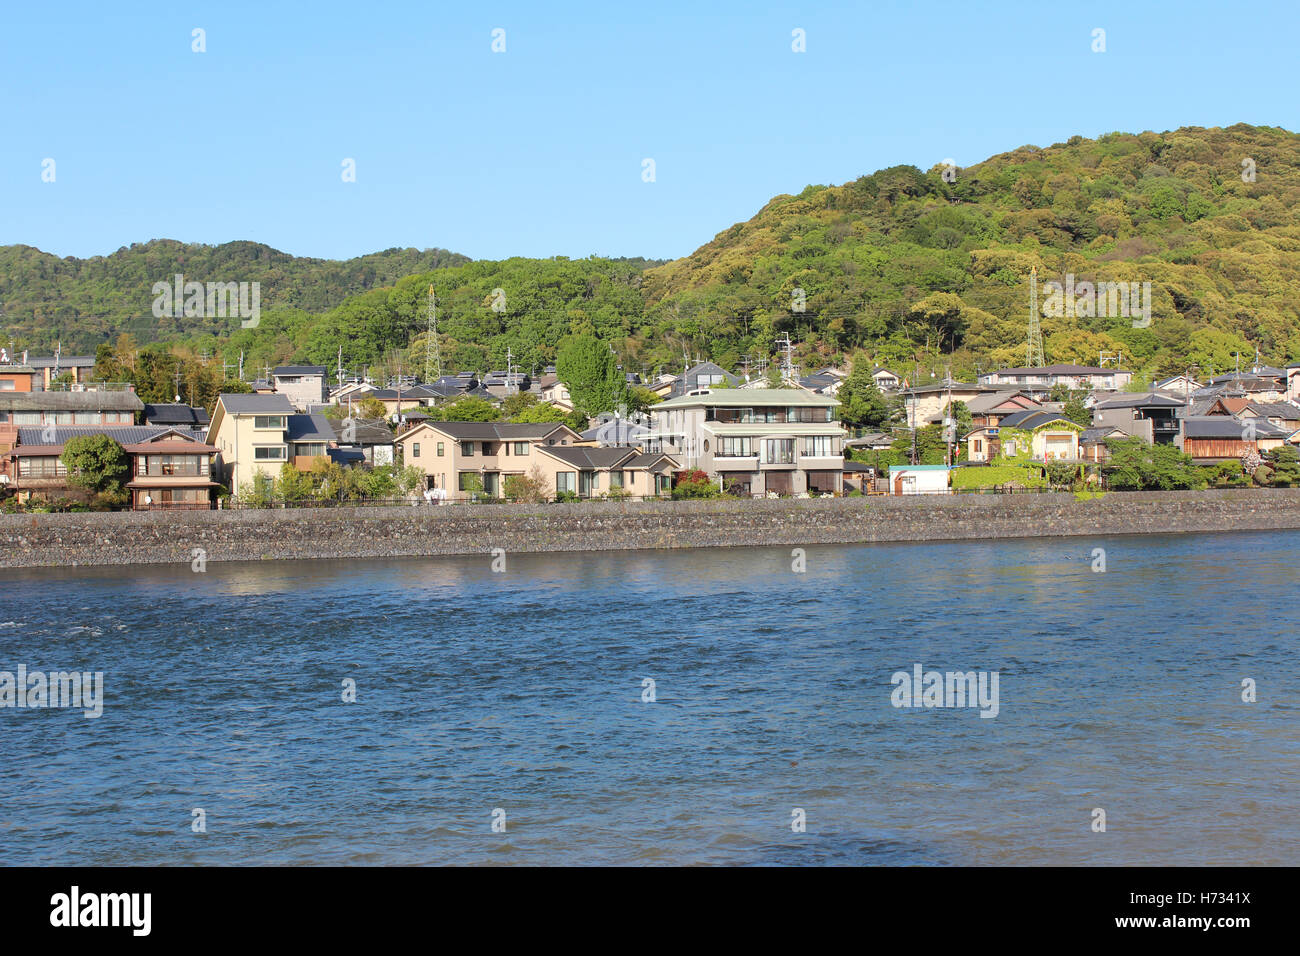 View of Uji city with the Uji River, houses, mountain and blue sky, Japan Stock Photo